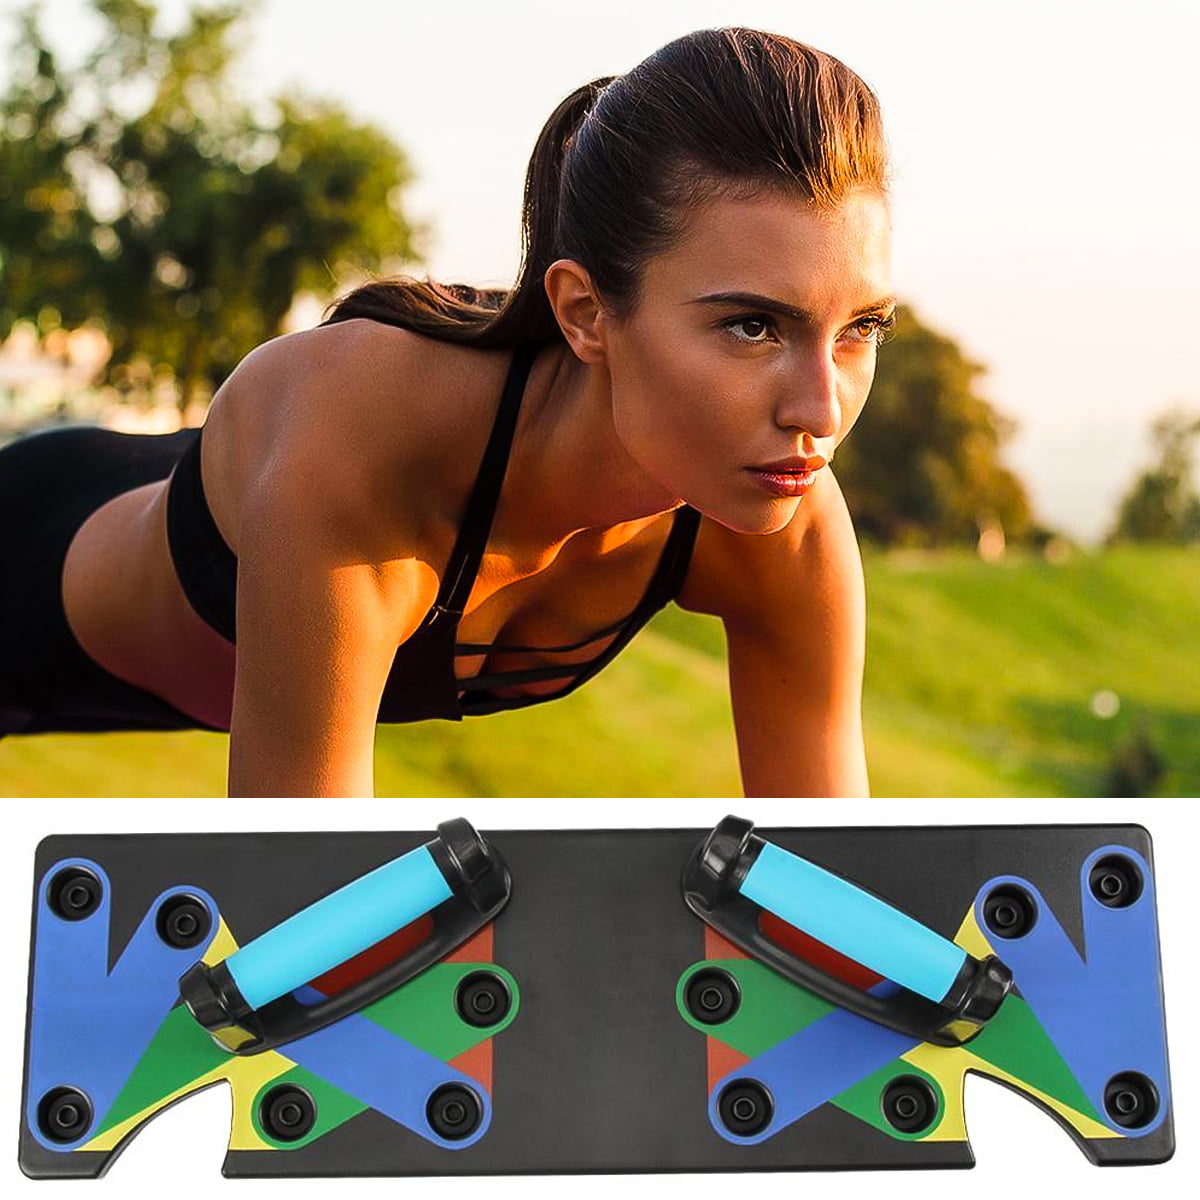 KUNORTH 13 in 1 Push Up Rack Board Kit With Resistance Bands Portable and Sturdy Press Up Board Multifunctional Exercises Muscle Board for Men Women Body Muscle Training limb Strength Training Sport